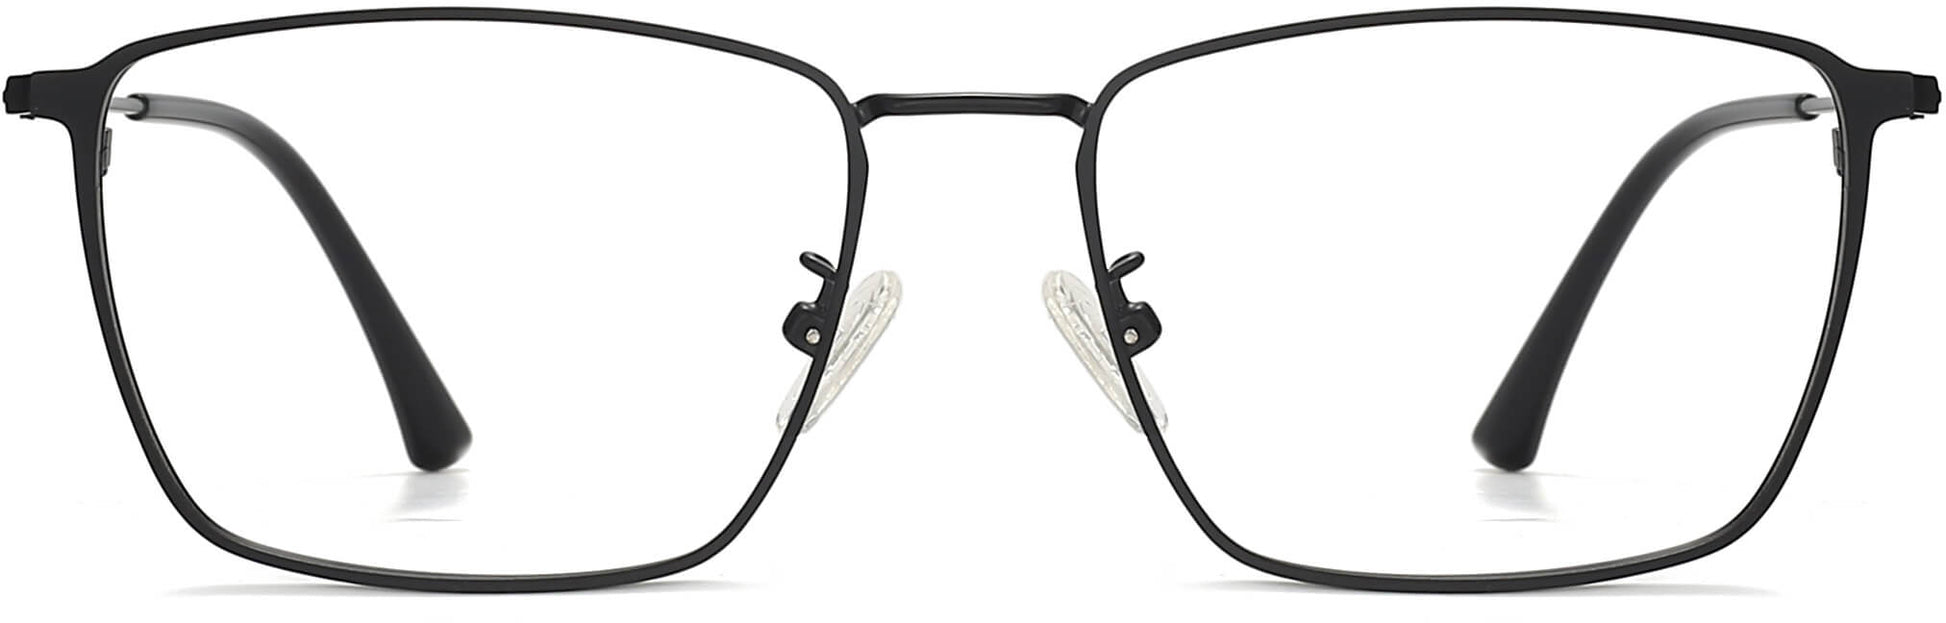 Jefferson Square Black Eyeglasses from ANRRI, front view